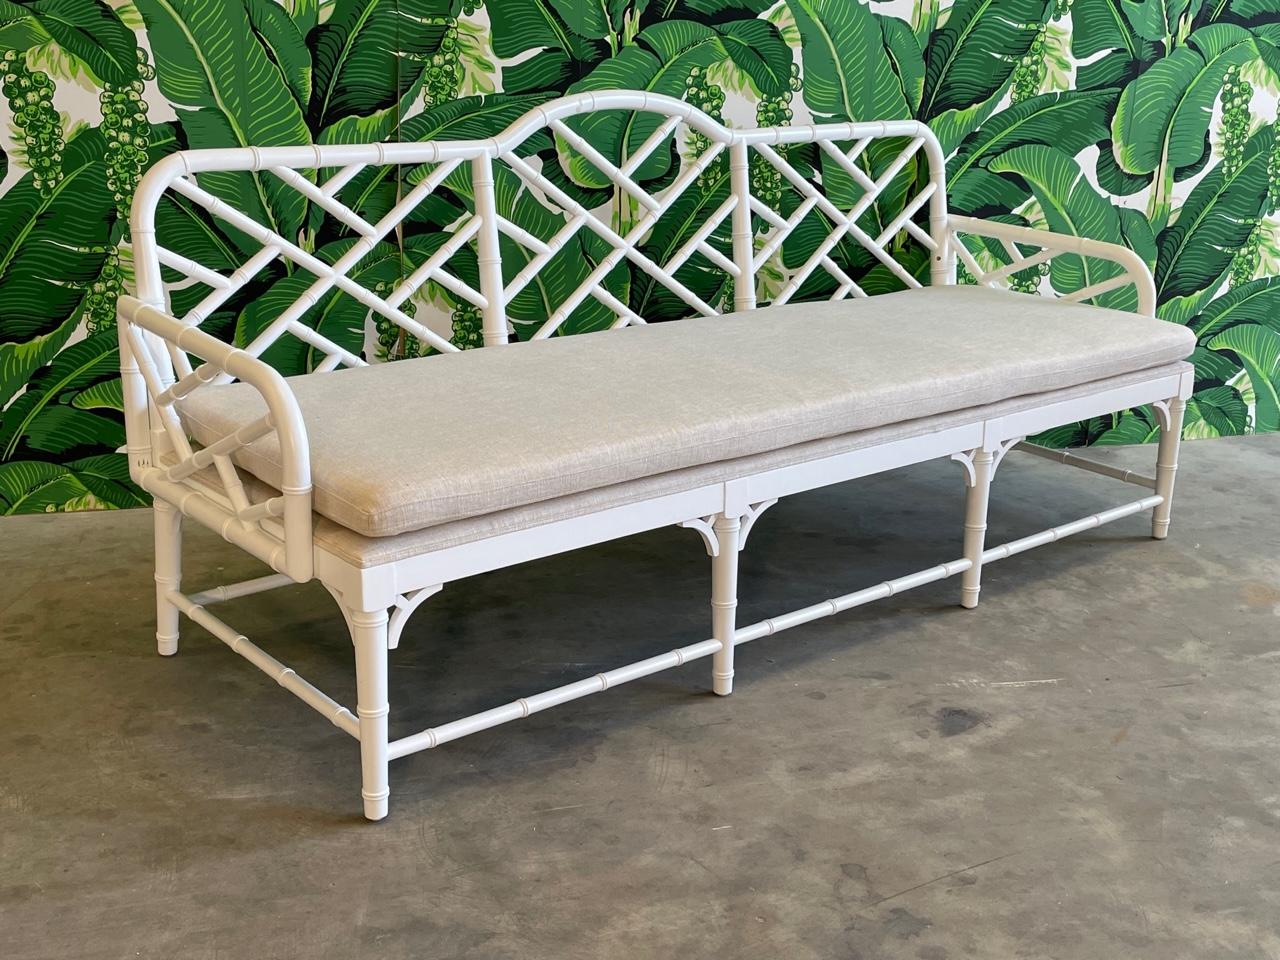 Pair of faux bamboo garden sofas feature chinoiserie style fretwork and solid tan cushions. Very good condition with only very minor imperfections consistent with age. Price is for the pair. We also have this sofa listed individually, check our